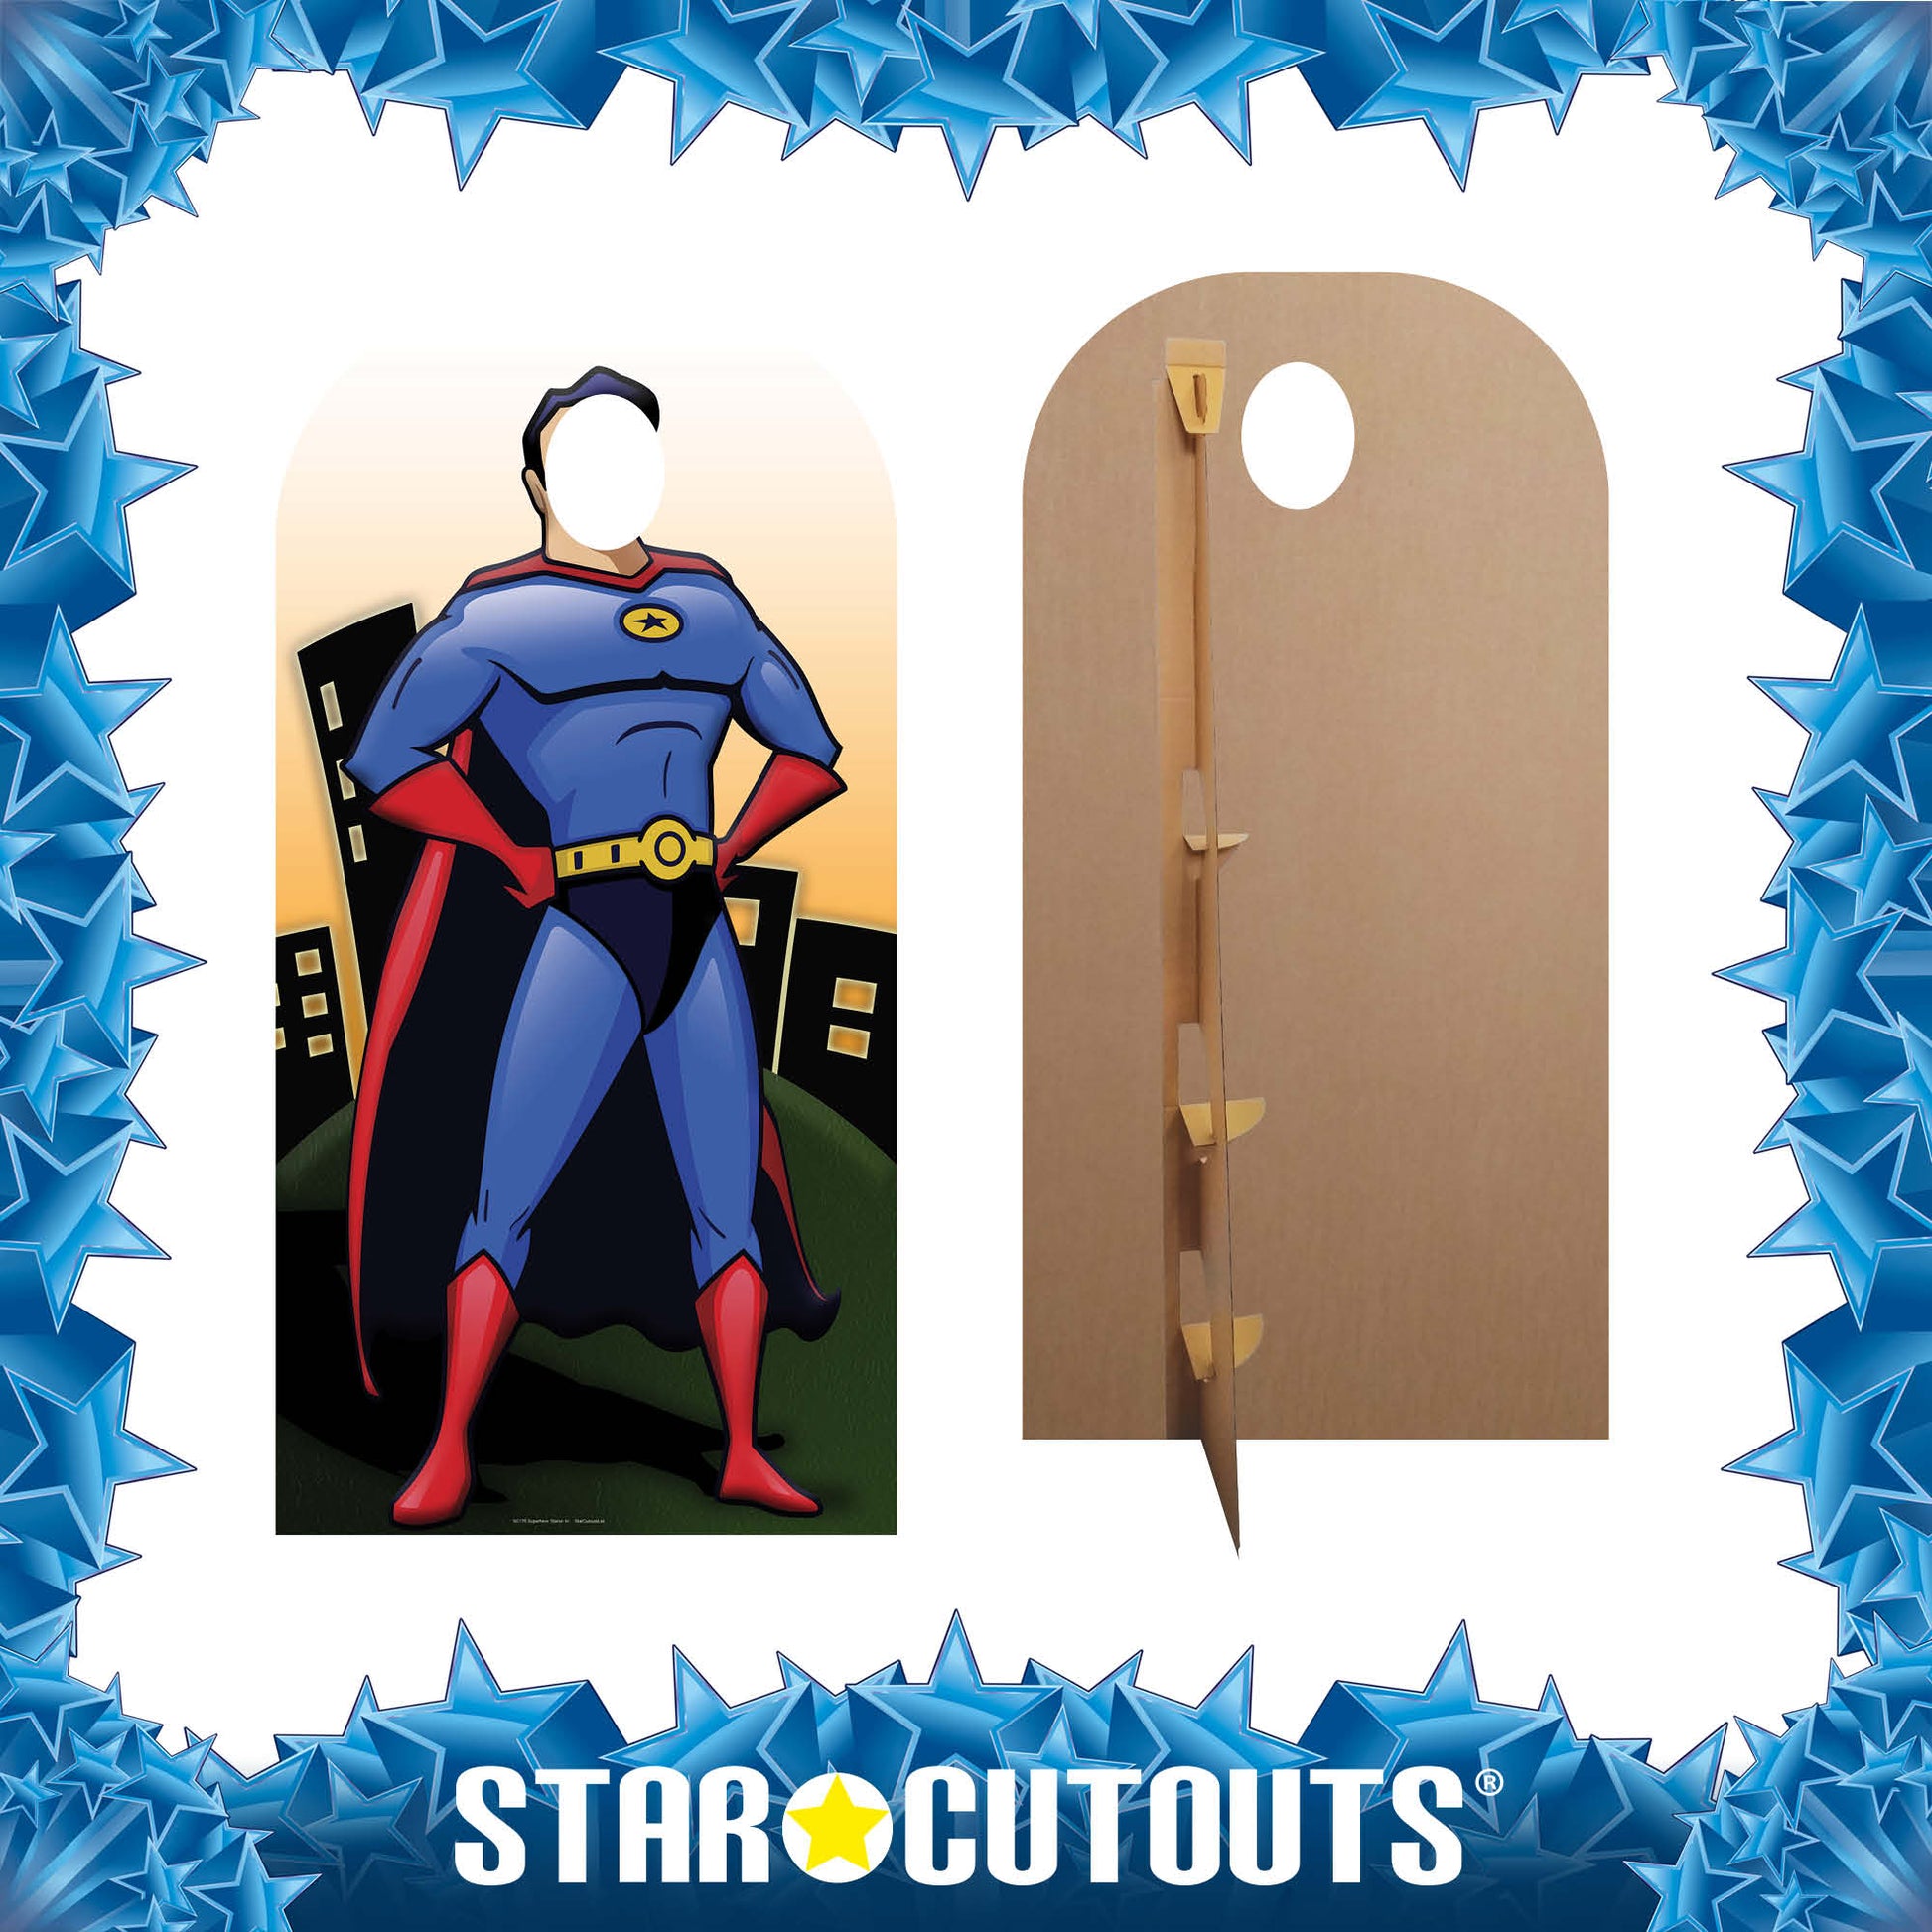 Lifesize Cardboard Cutout of Superhero Stand-in (SSCO176 ) buy cutouts at